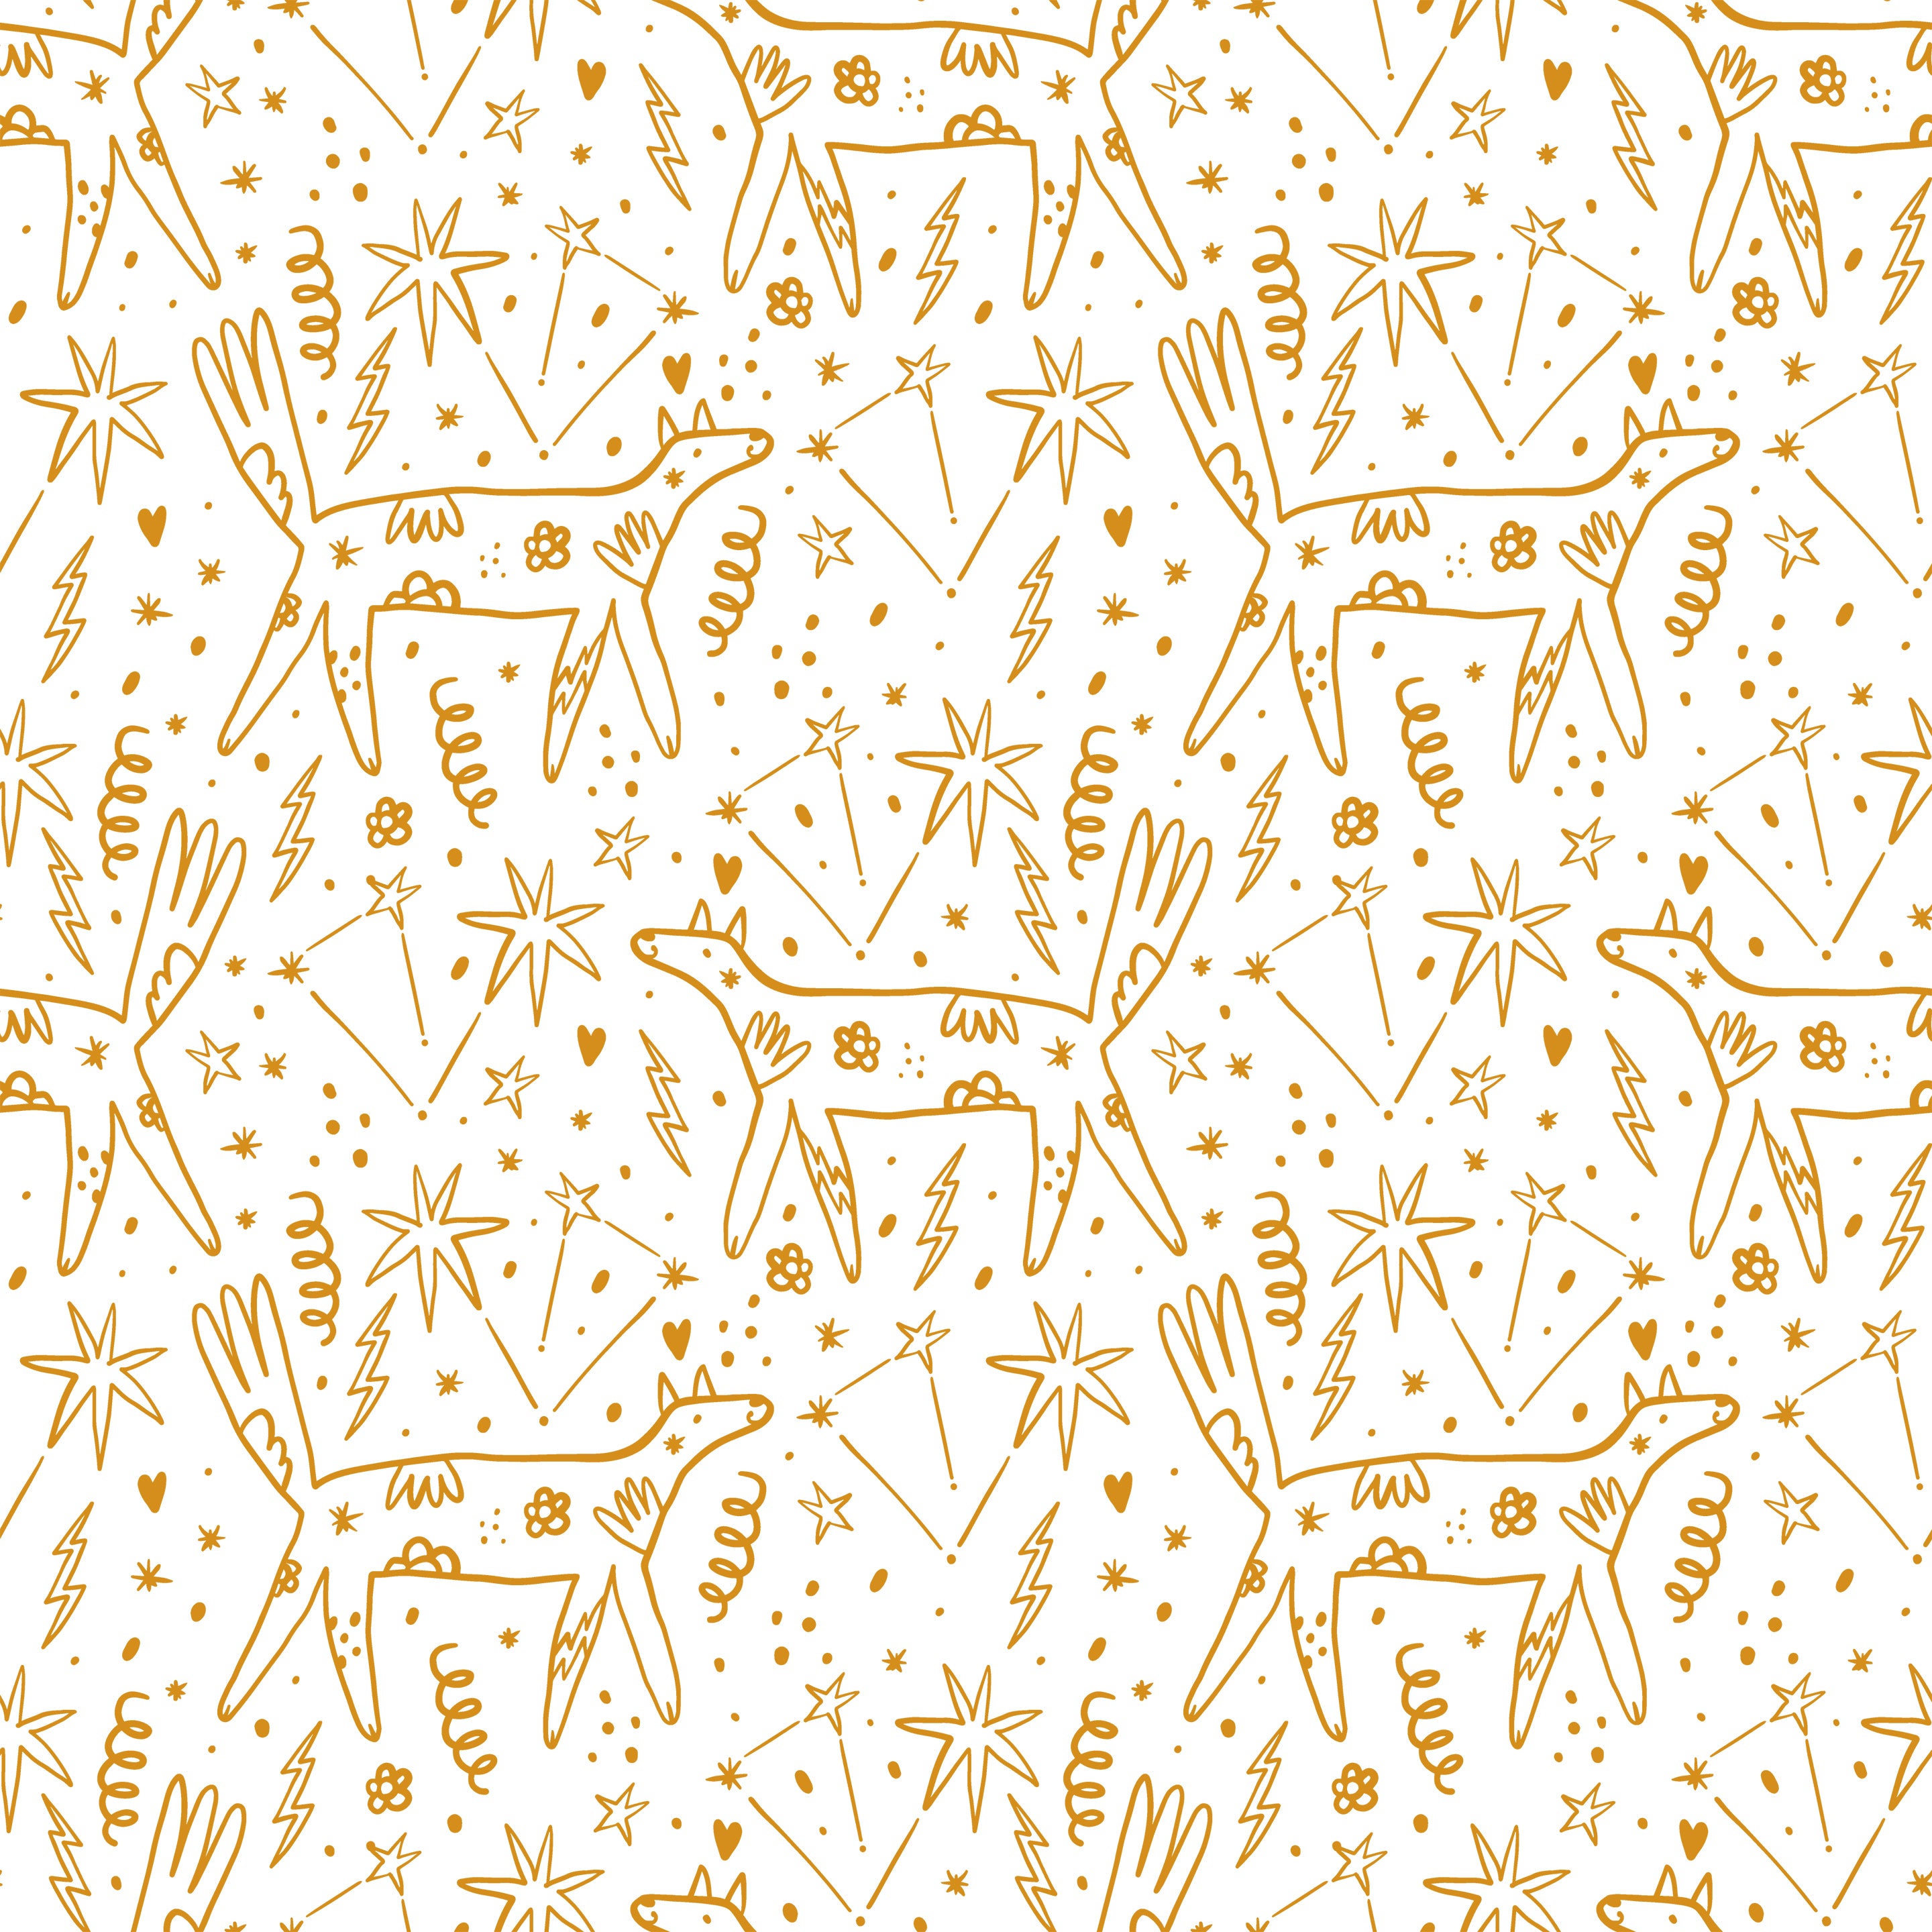 Chic and artistic 'Dog Wallpaper 34' featuring white and golden abstract dogs and stars on a clean background, ideal for a modern and stylish room setting.